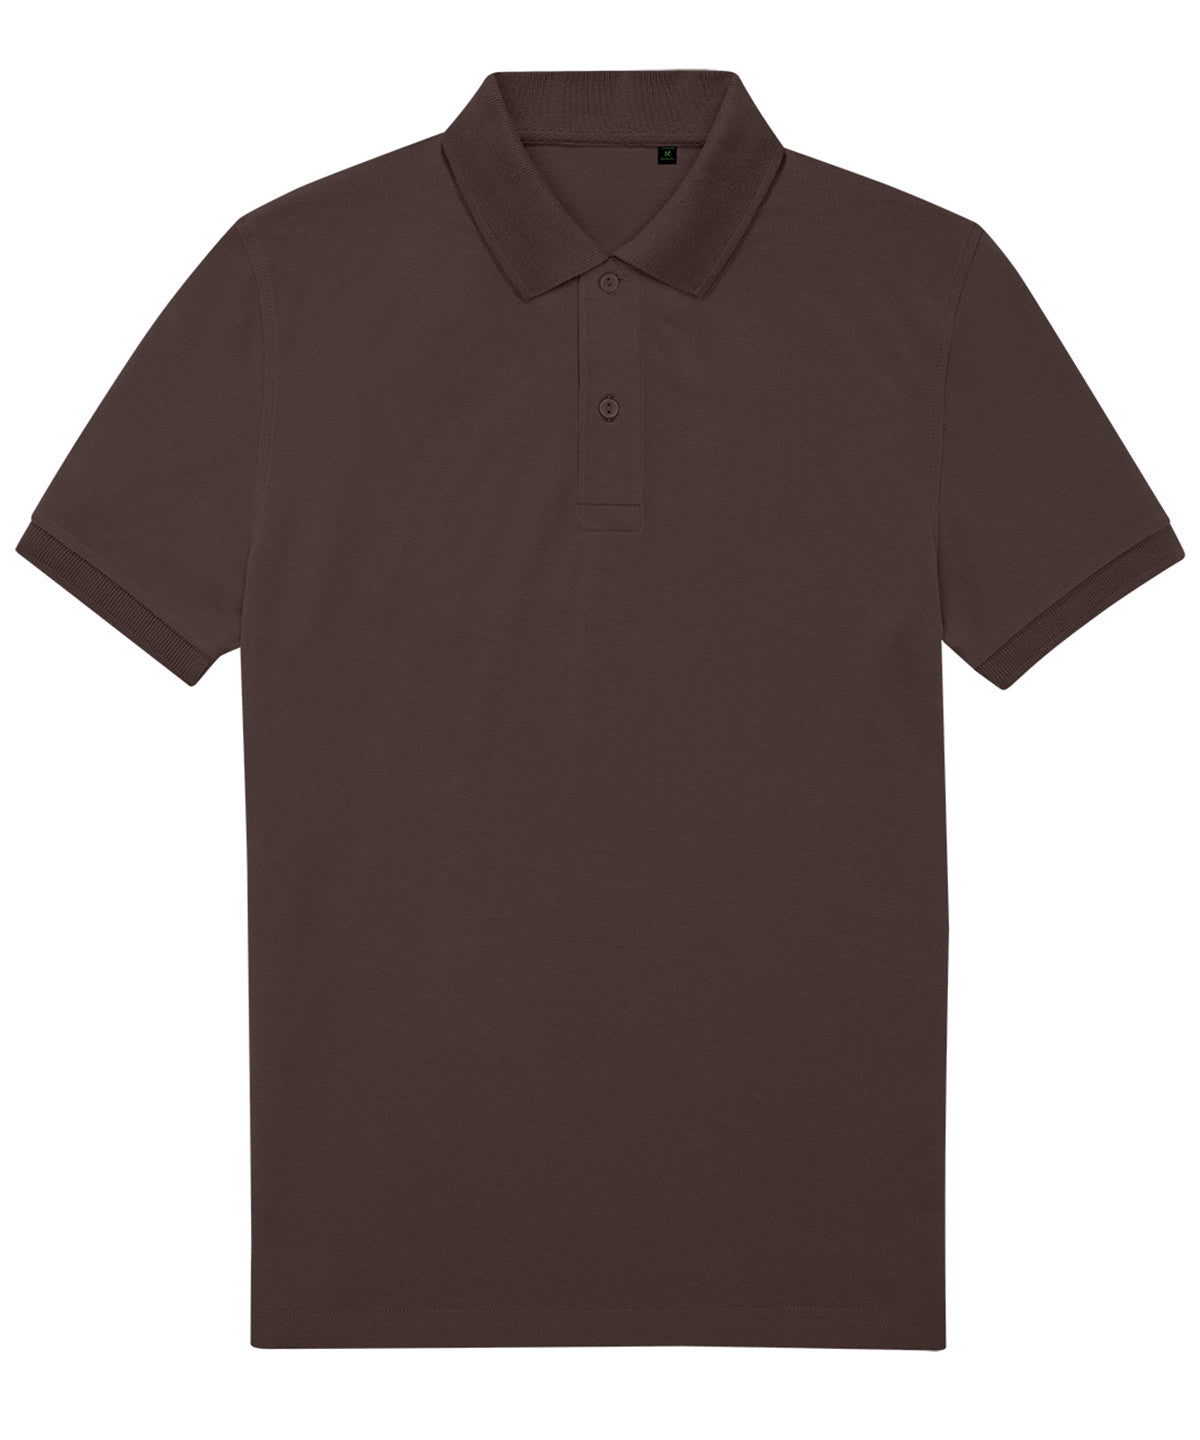 B&C Collection My Eco Polo 65/35 Roasted Coffee